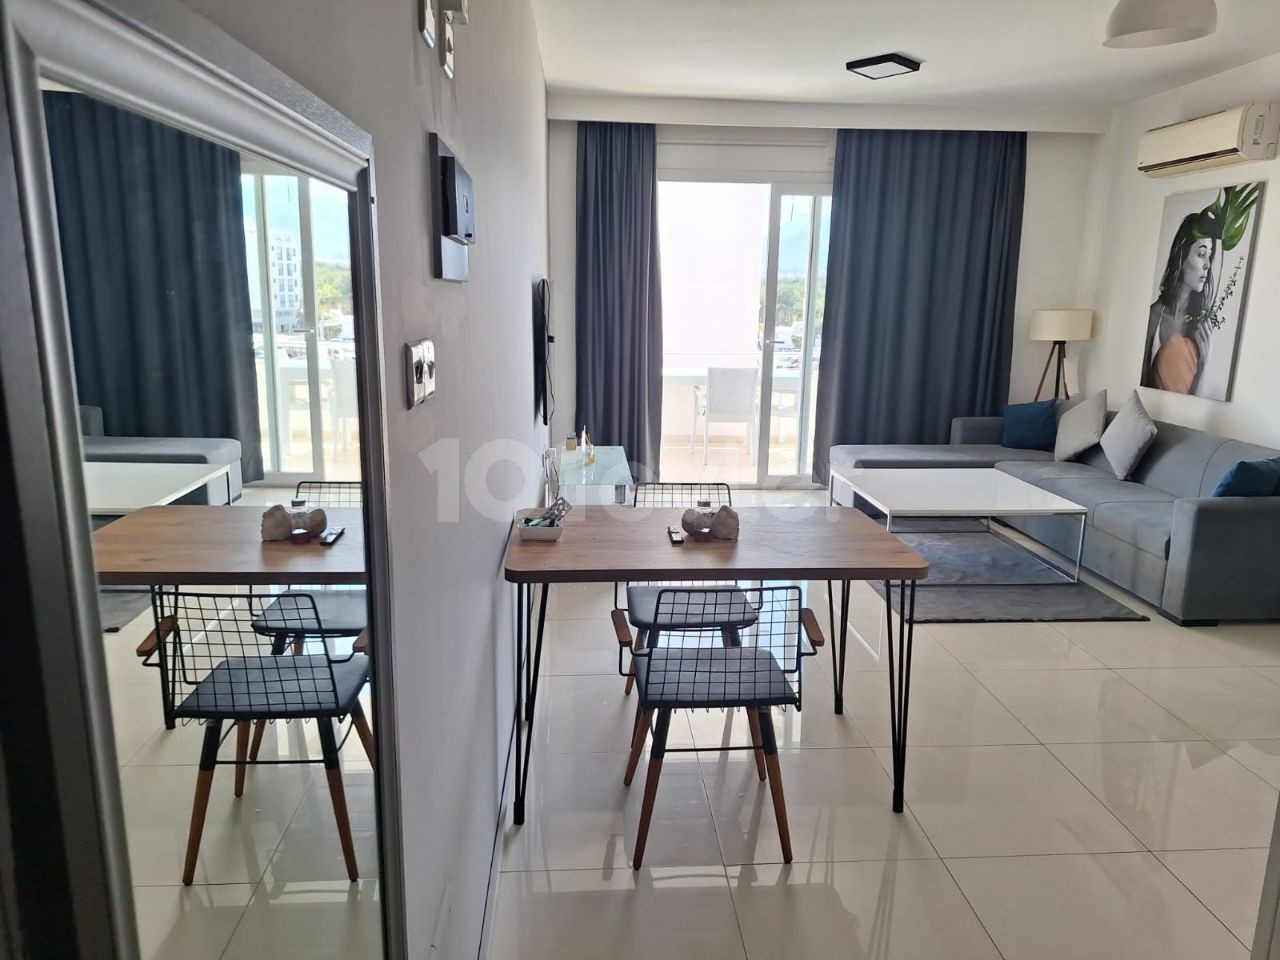 1+1 Flat for Rent in Kyrenia